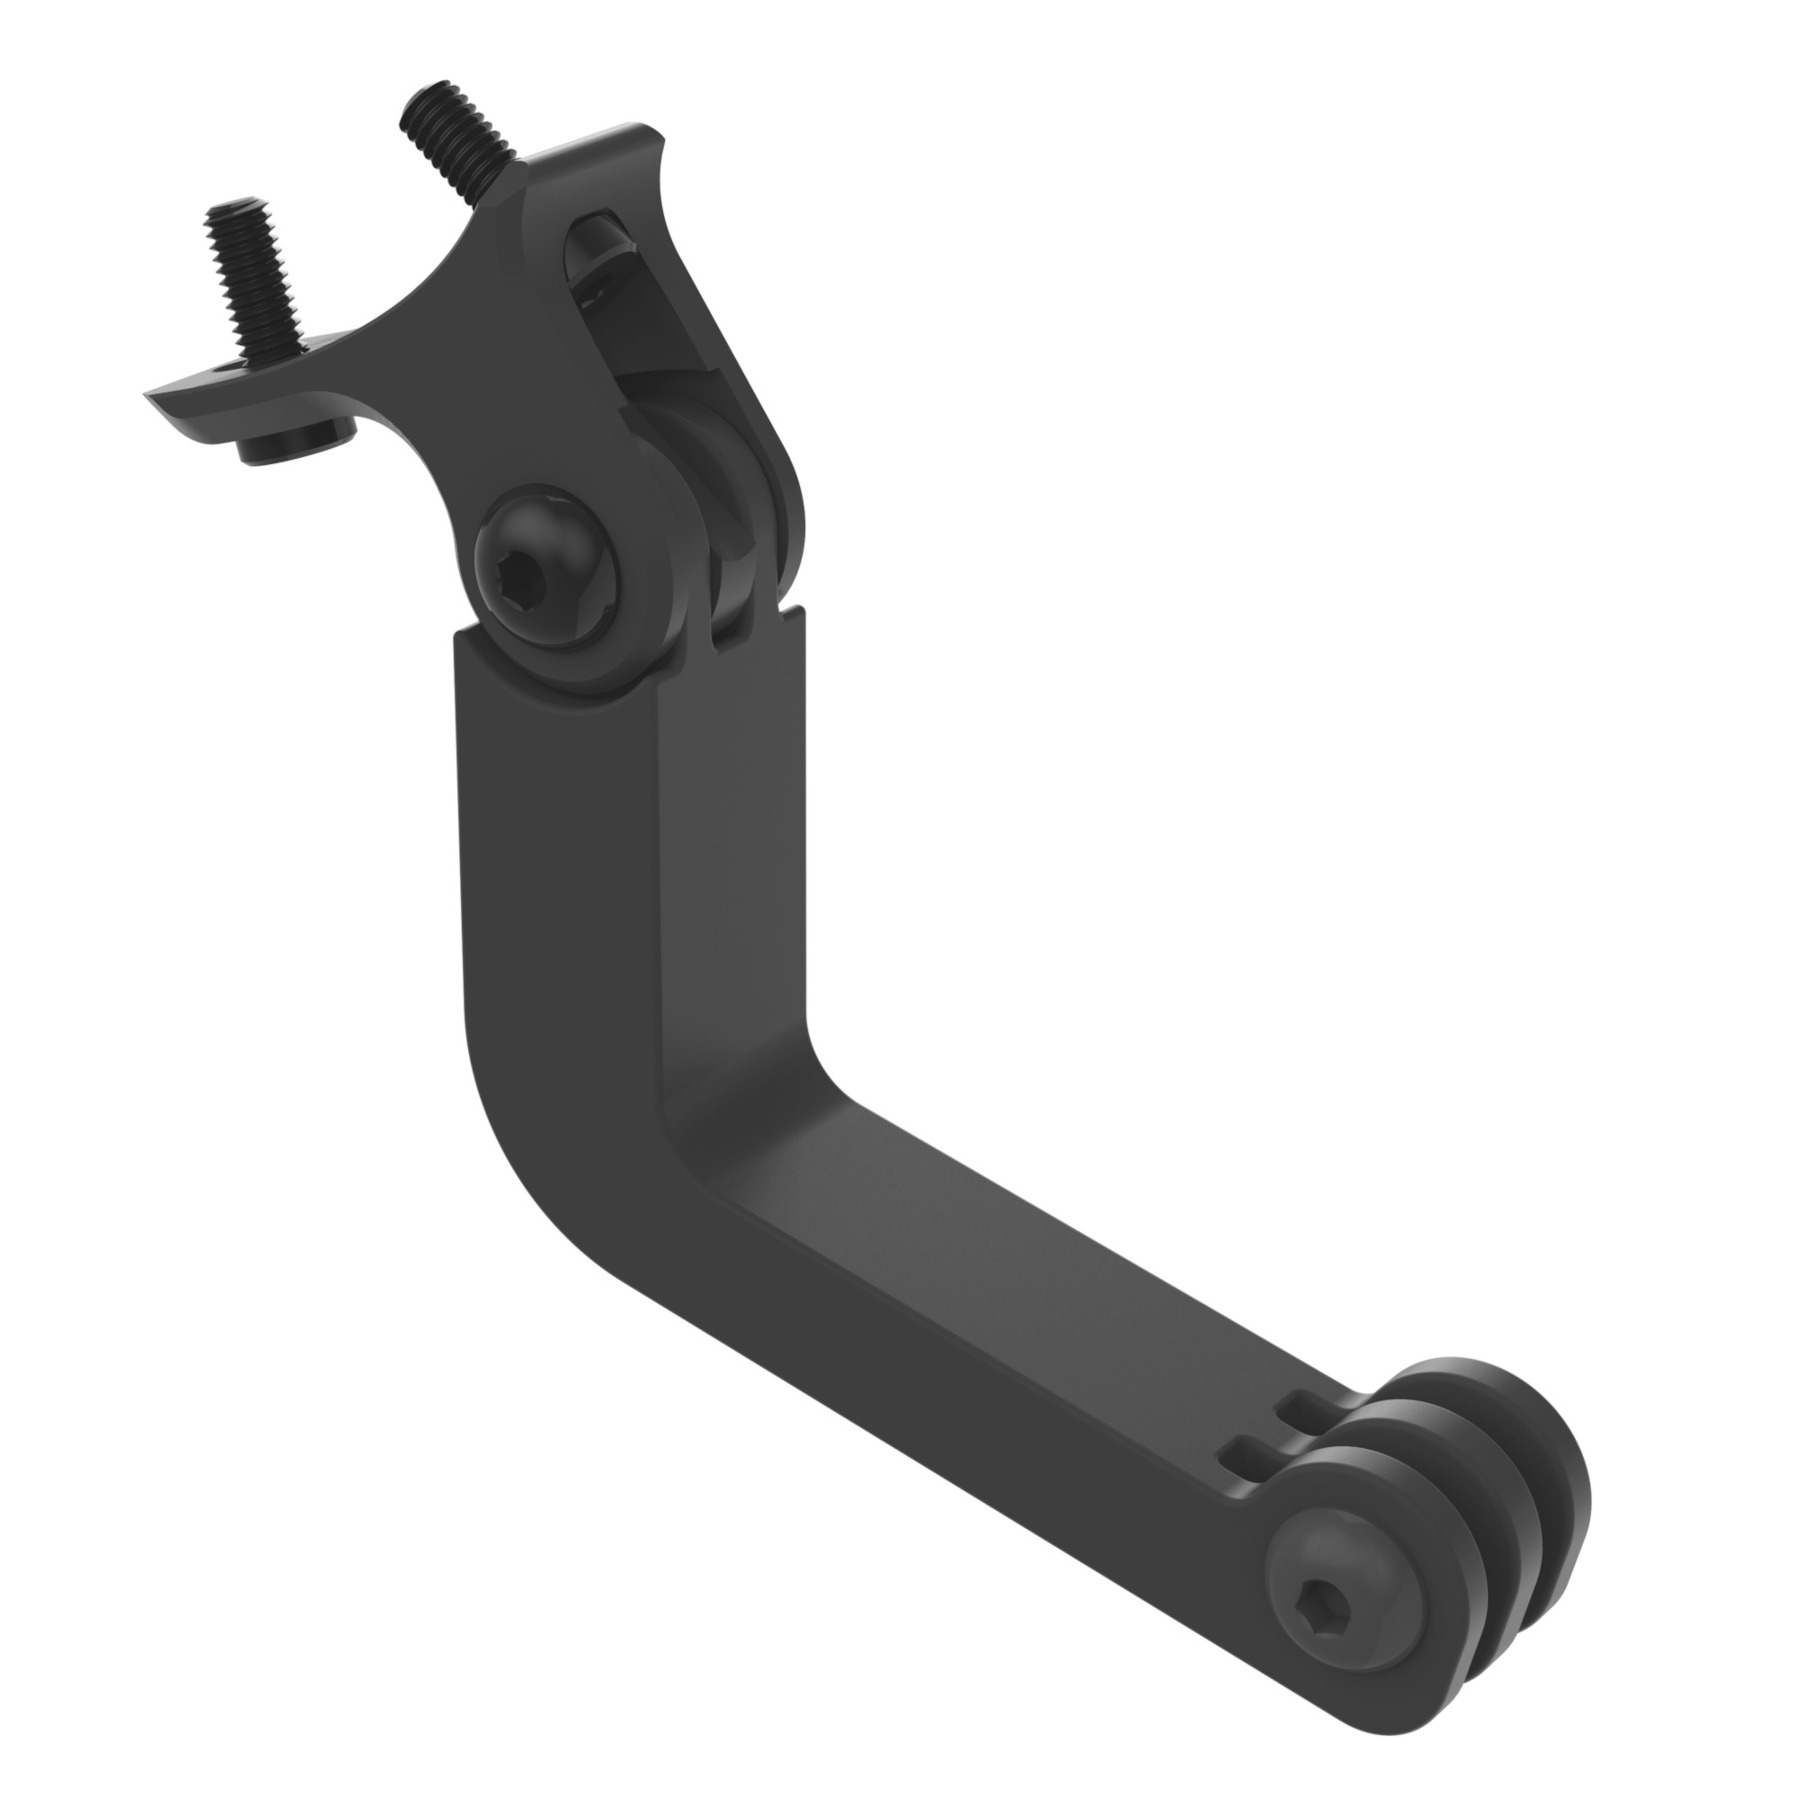 Productfoto van Syncros Mount for iC Handlebar / Stem Units - GoPro Interface | for Camera / Light